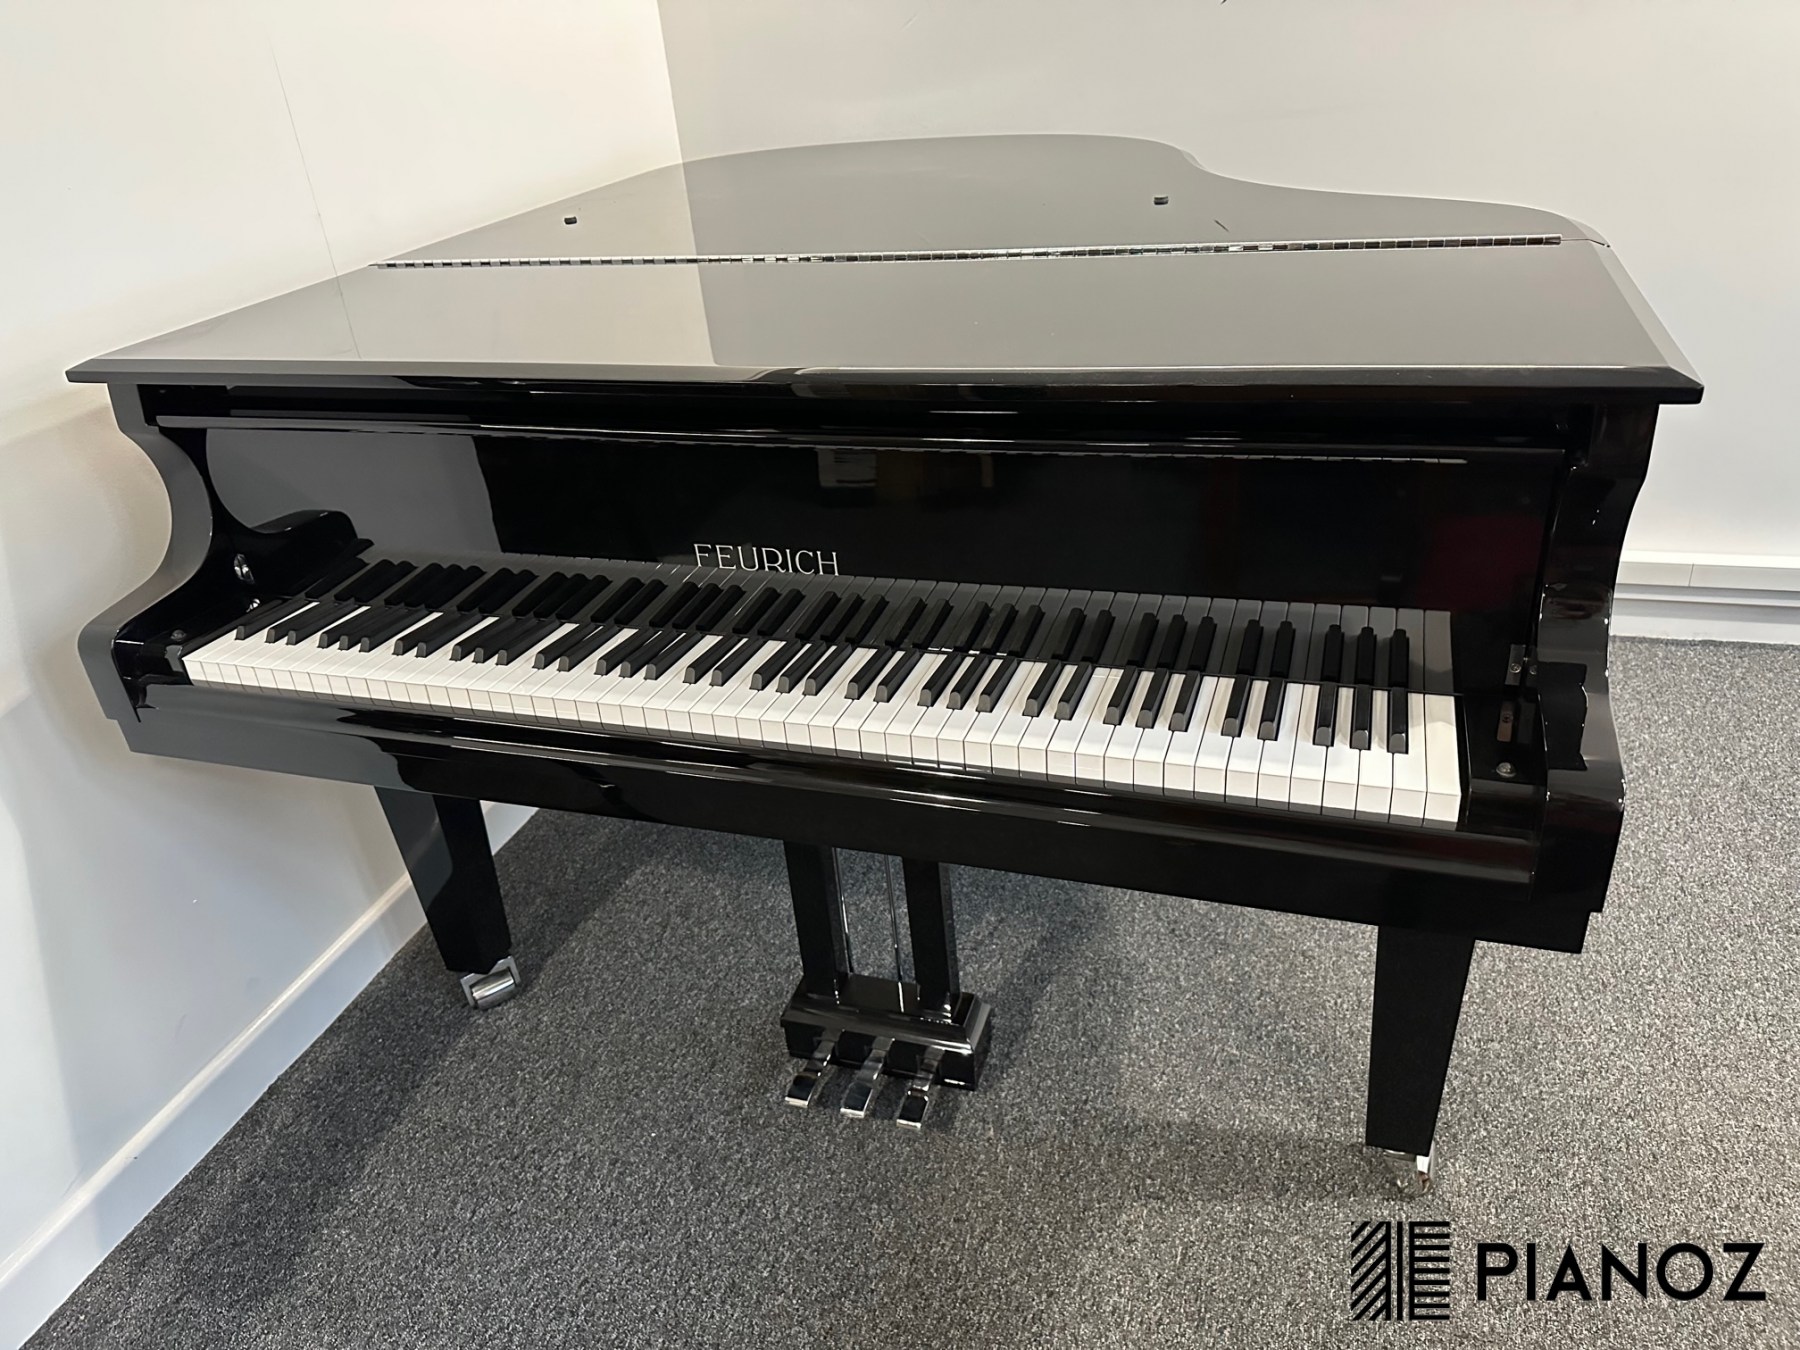 Feurich 179 Dynamic II Grand Piano piano for sale in UK